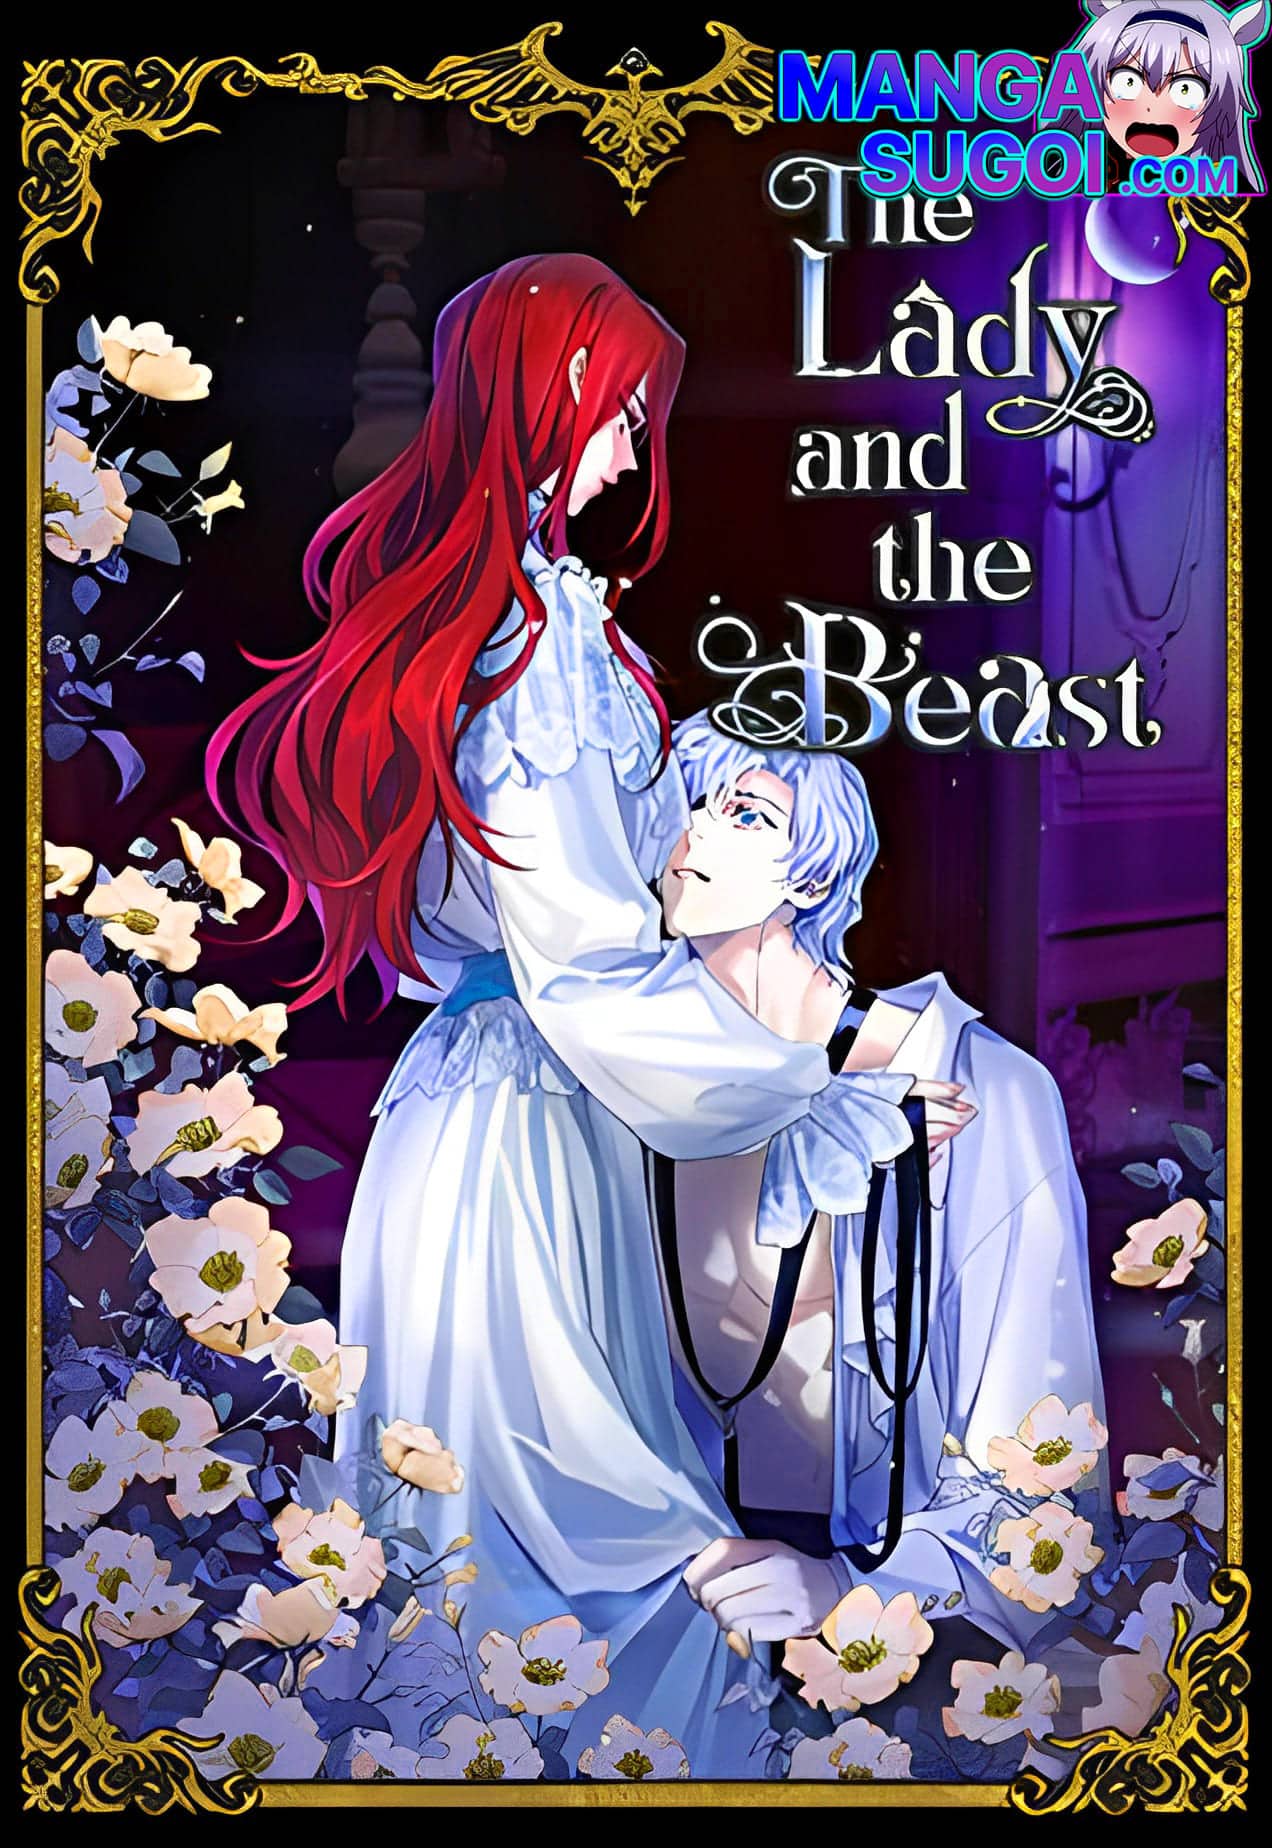 The Lady and The Beast